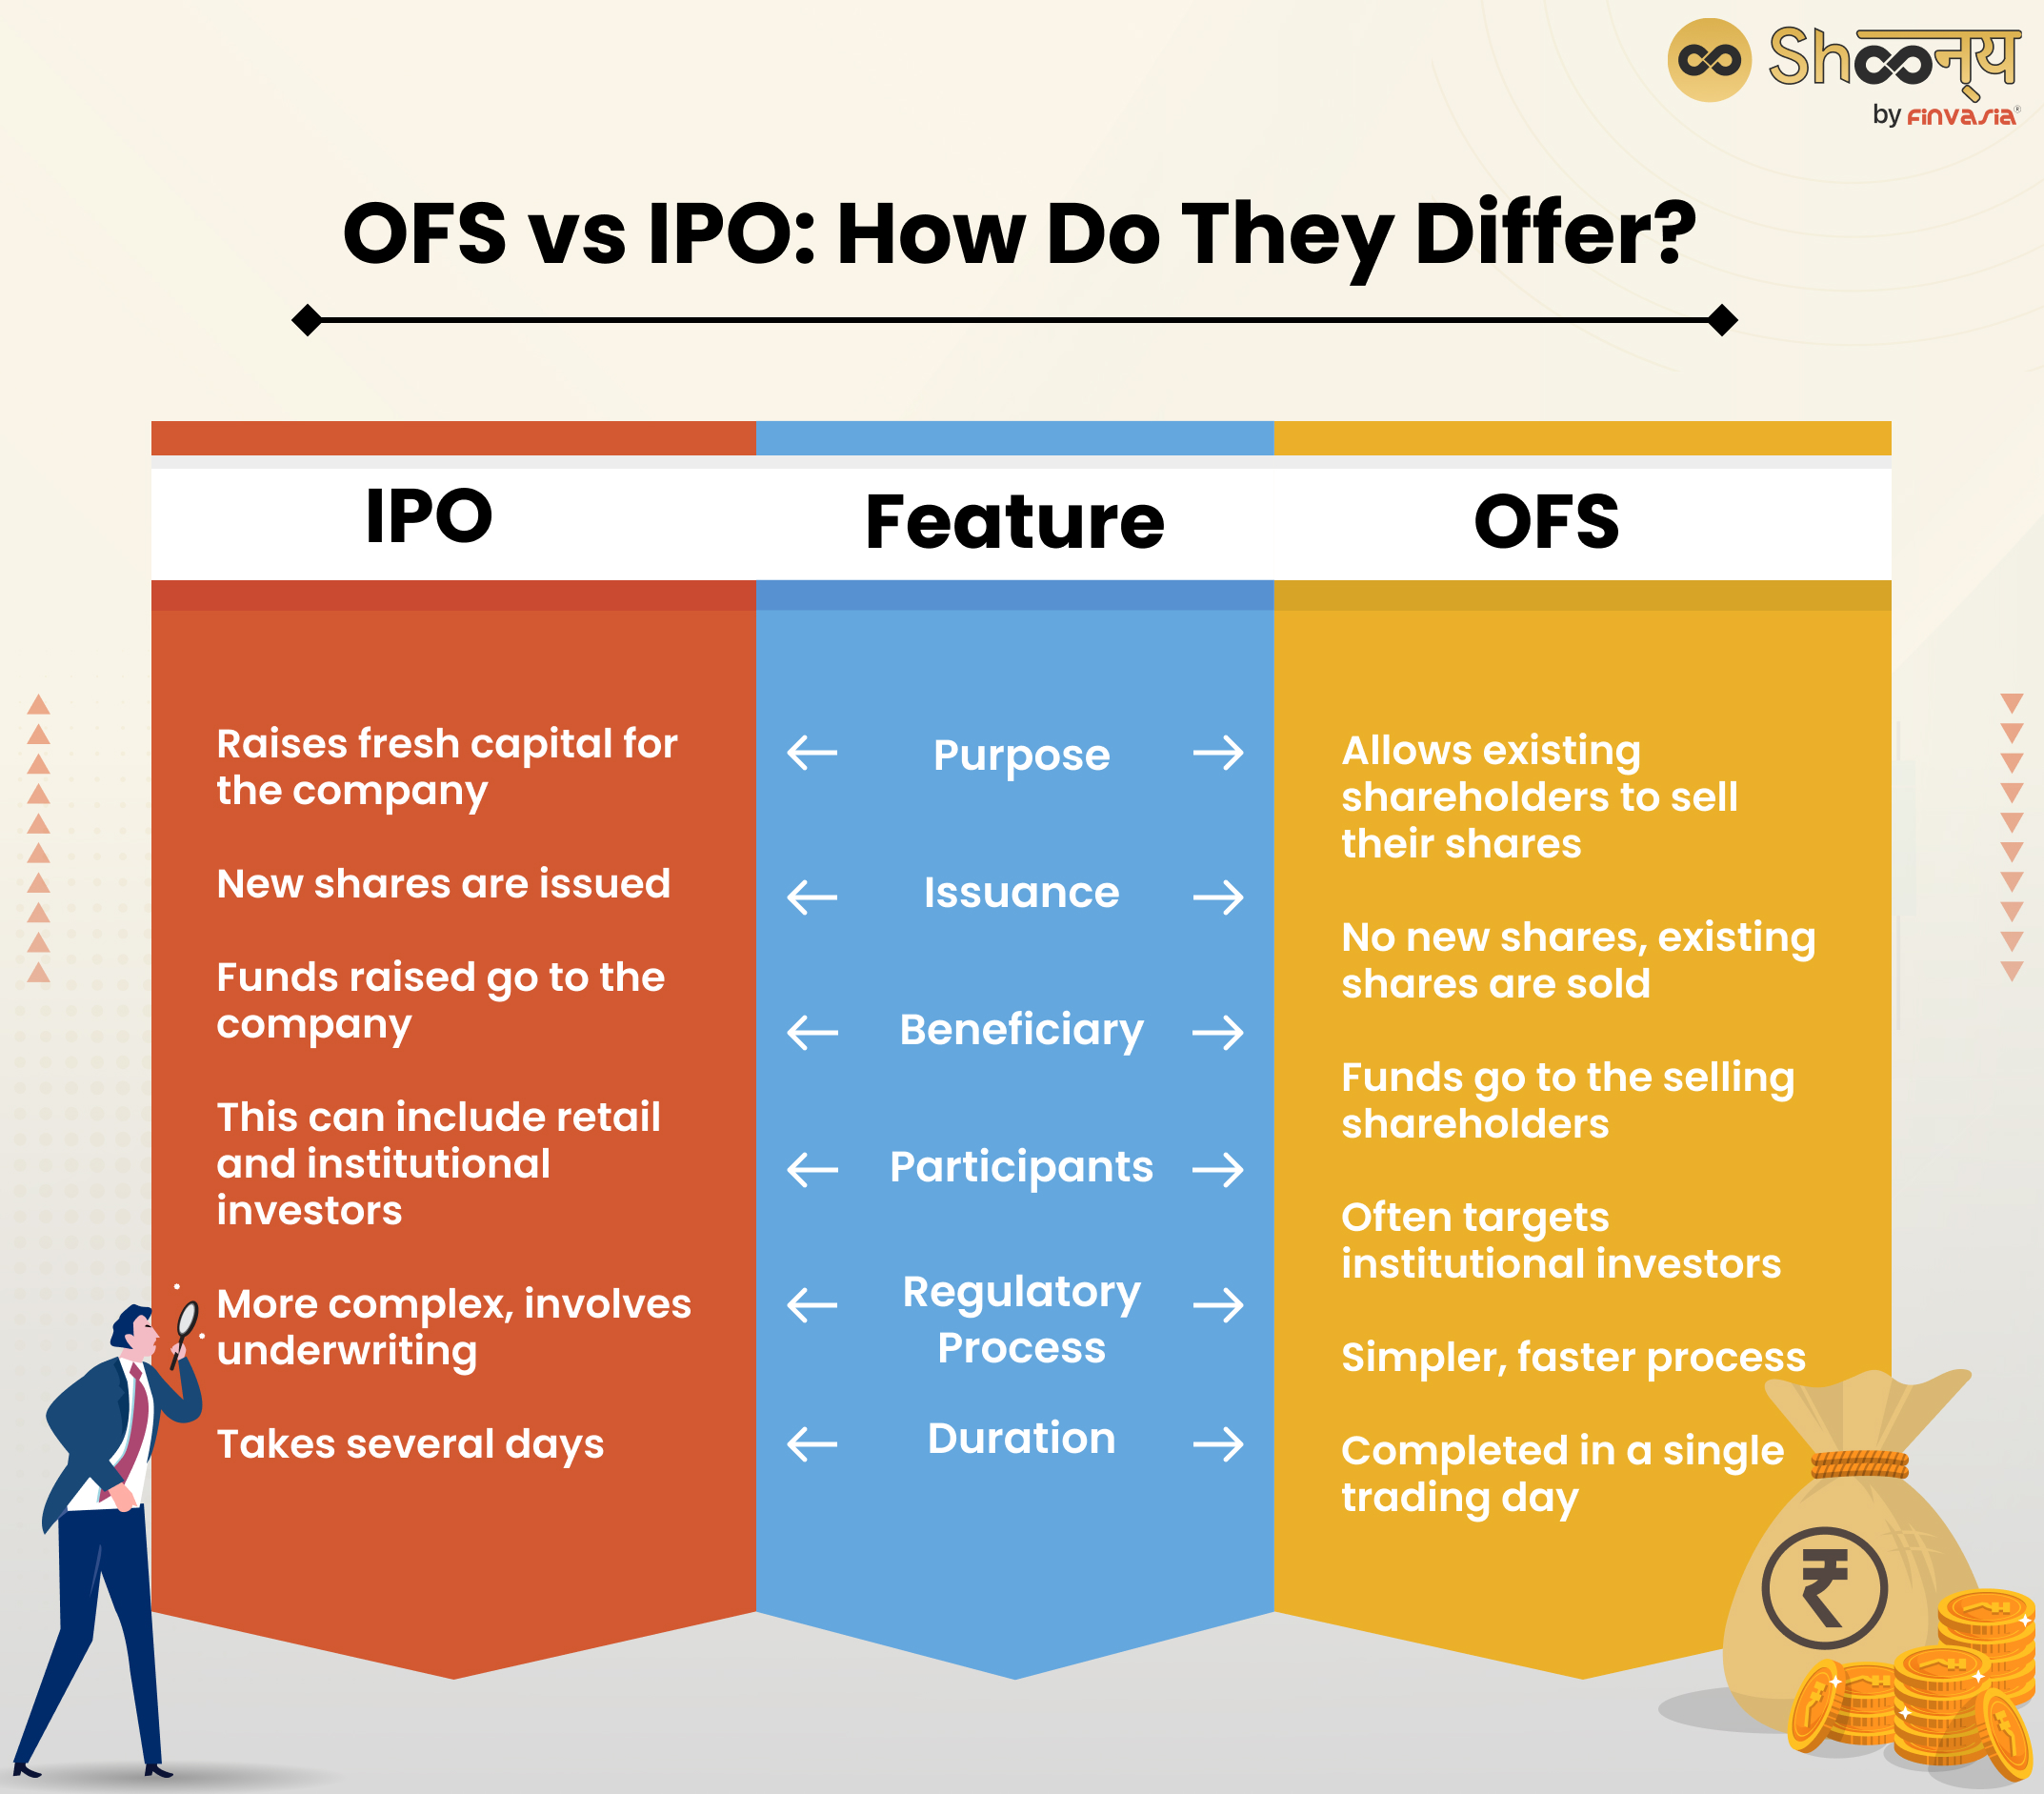 OFS vs IPO: How Do They Differ?